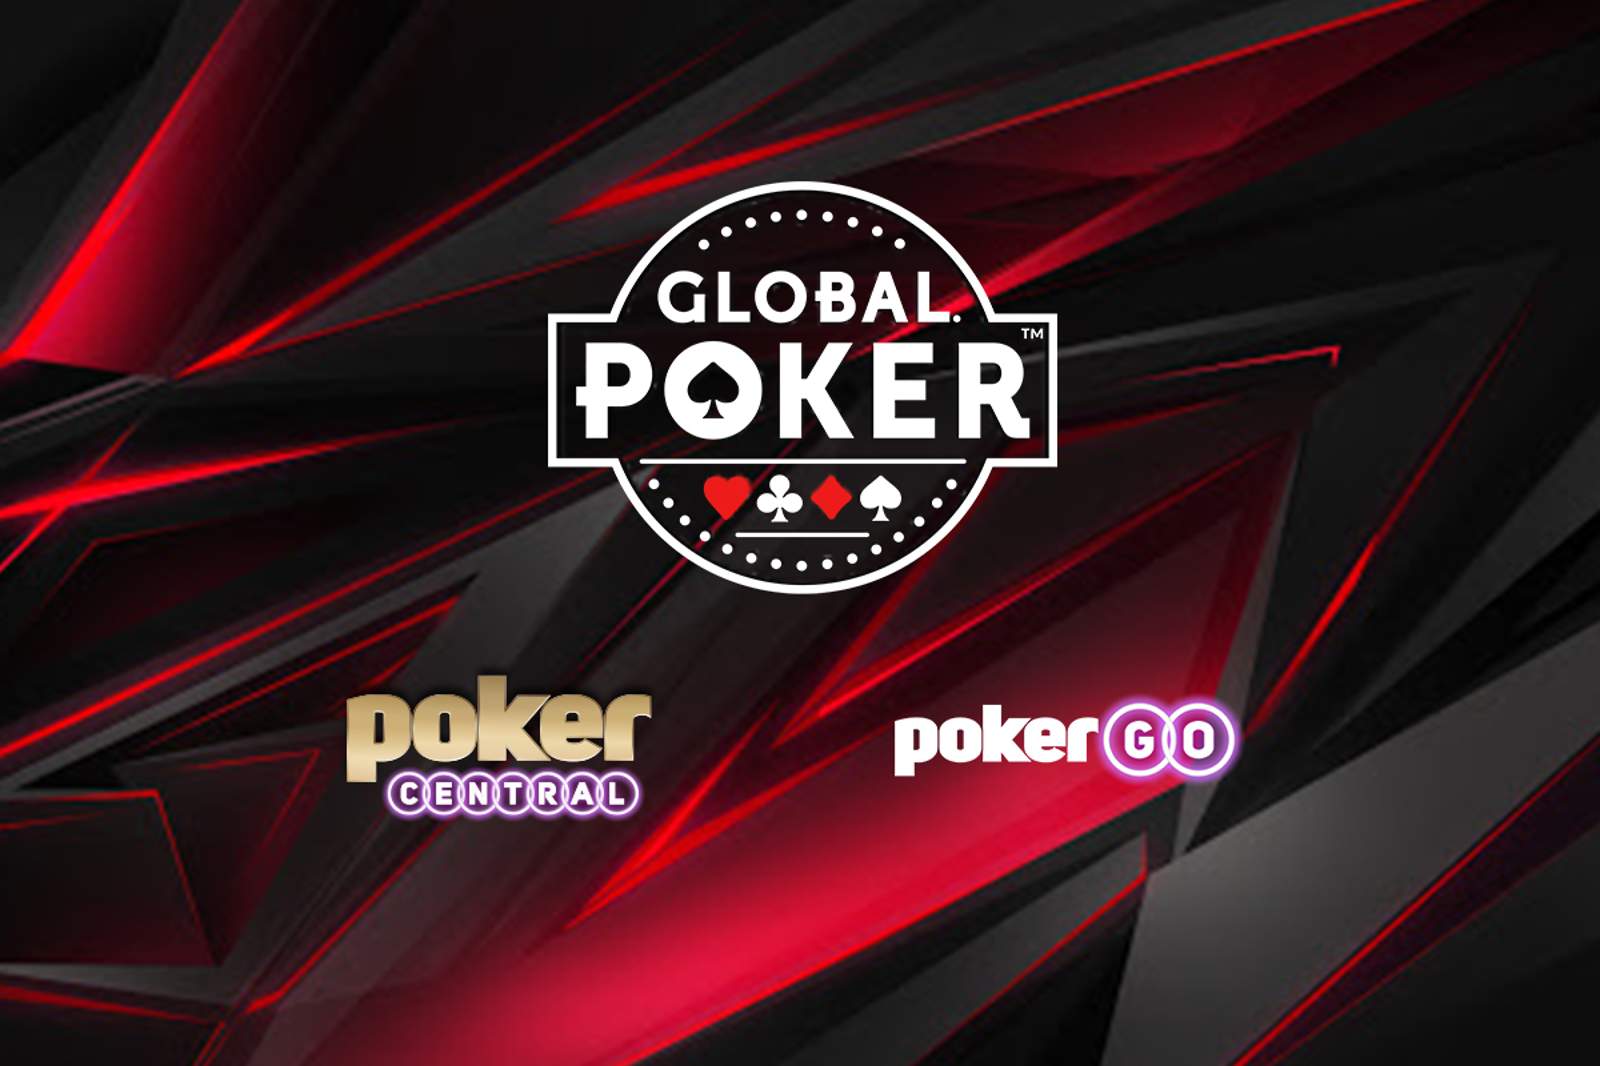 Global Poker and Poker Central Form Groundbreaking Live Event Partnership